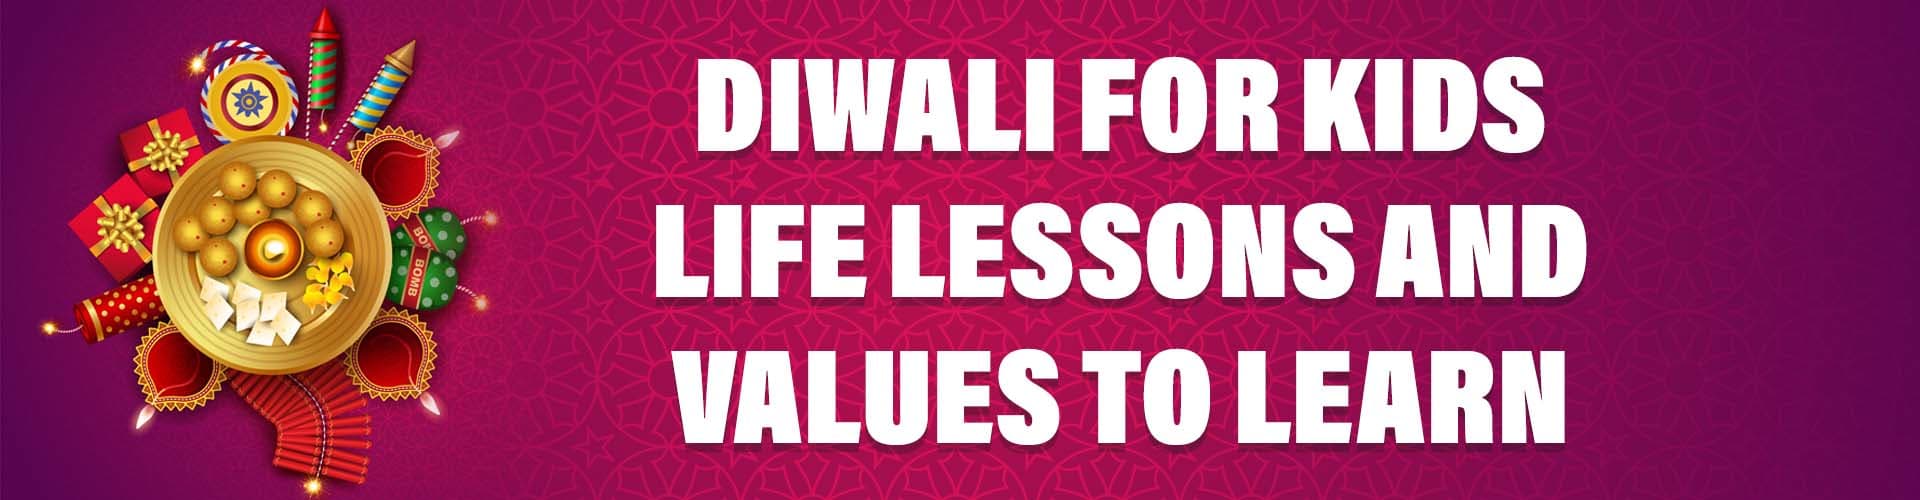 Diwali for Kids, Life Lessons and Values to Learn